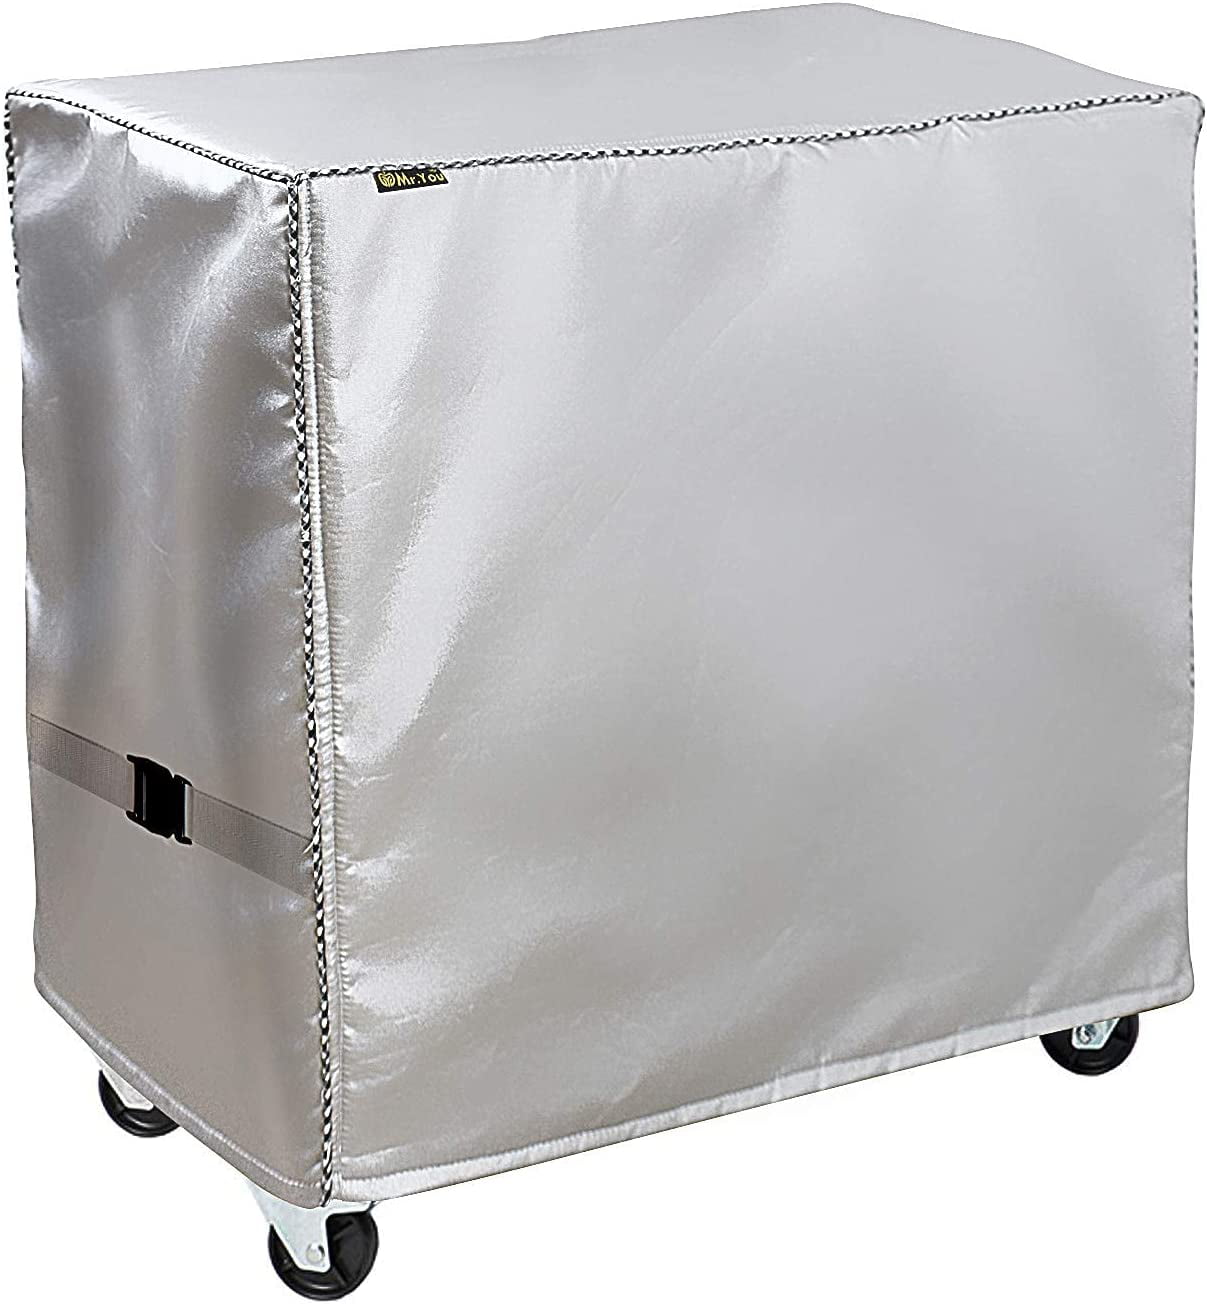 Protective Cover Black - Universal Fit for Most 80 QT,Super Insulation Cashmere Material,Rolling Cooler Patio Cooler,Beverage Cart, Rolling Ice Chest Cooler Cart Cover New Upgrade 